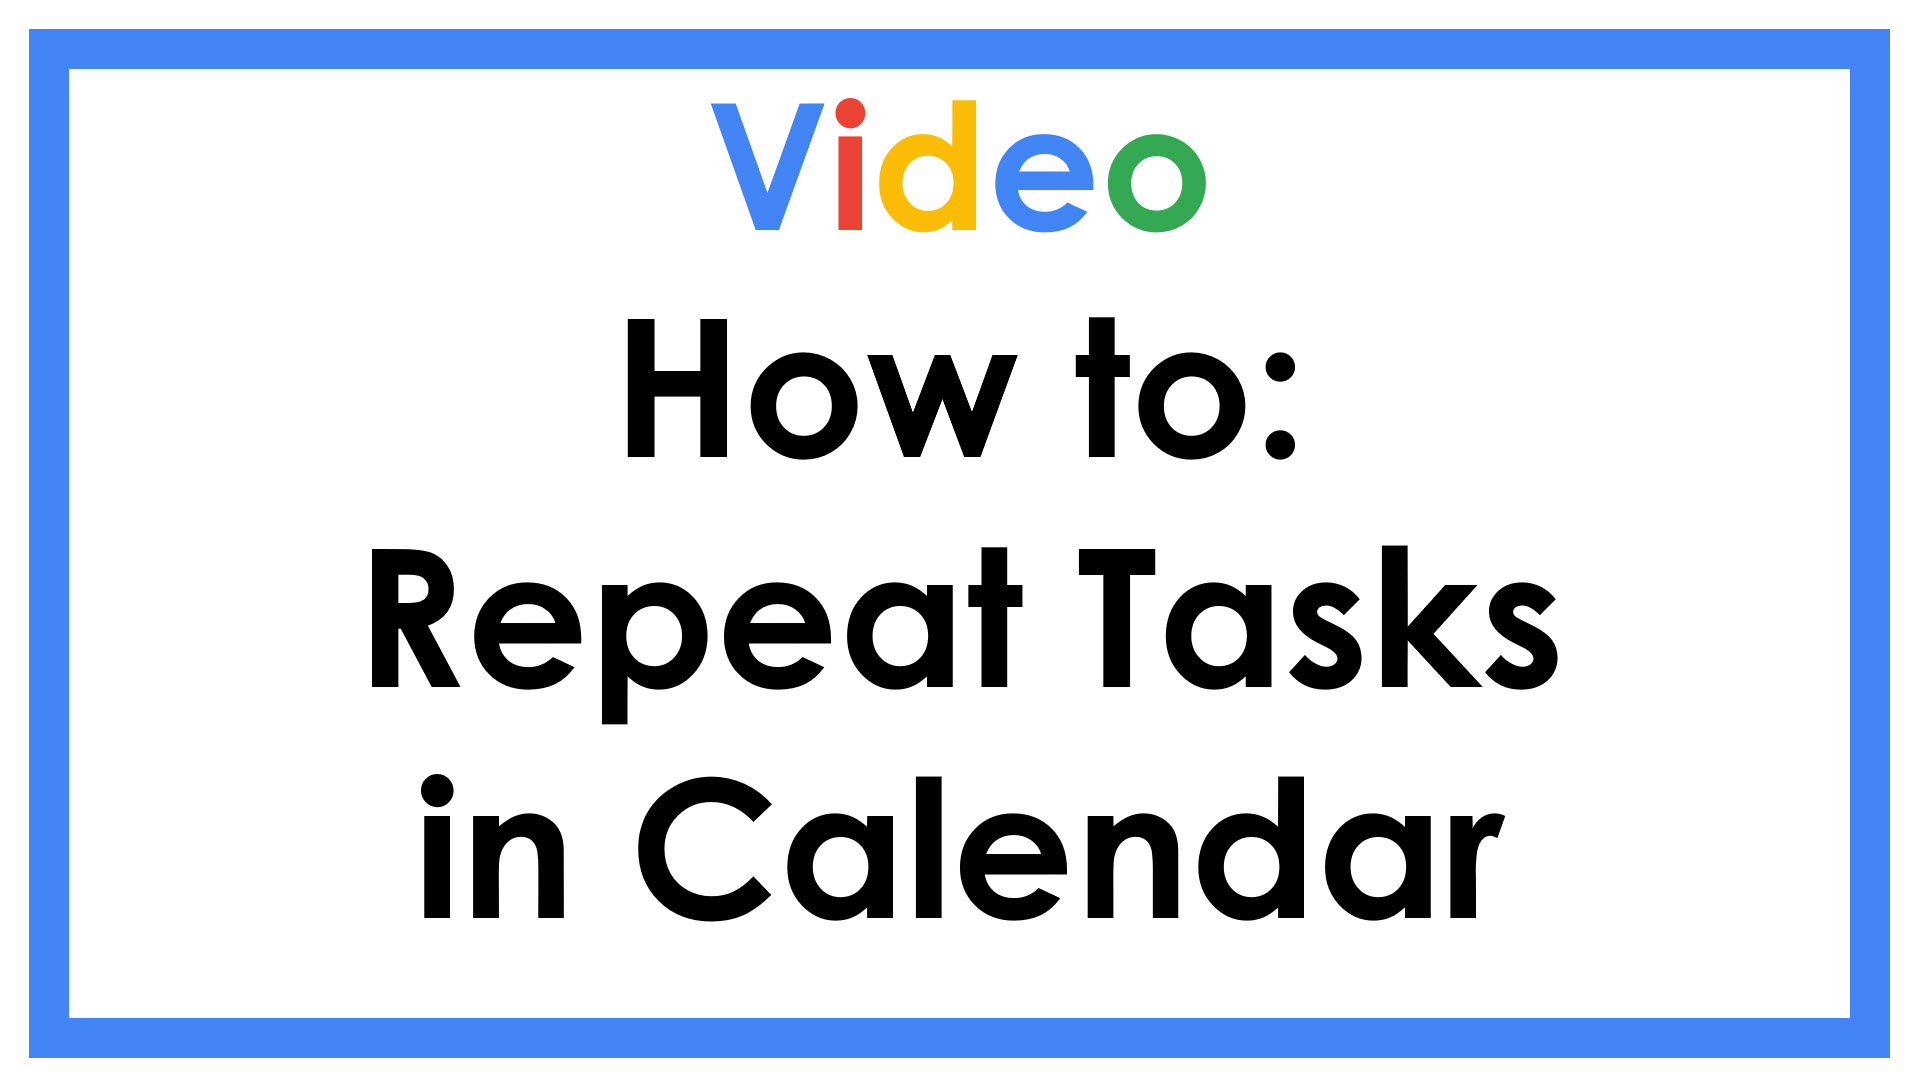 Video How To: Repeat Tasks in Calendar